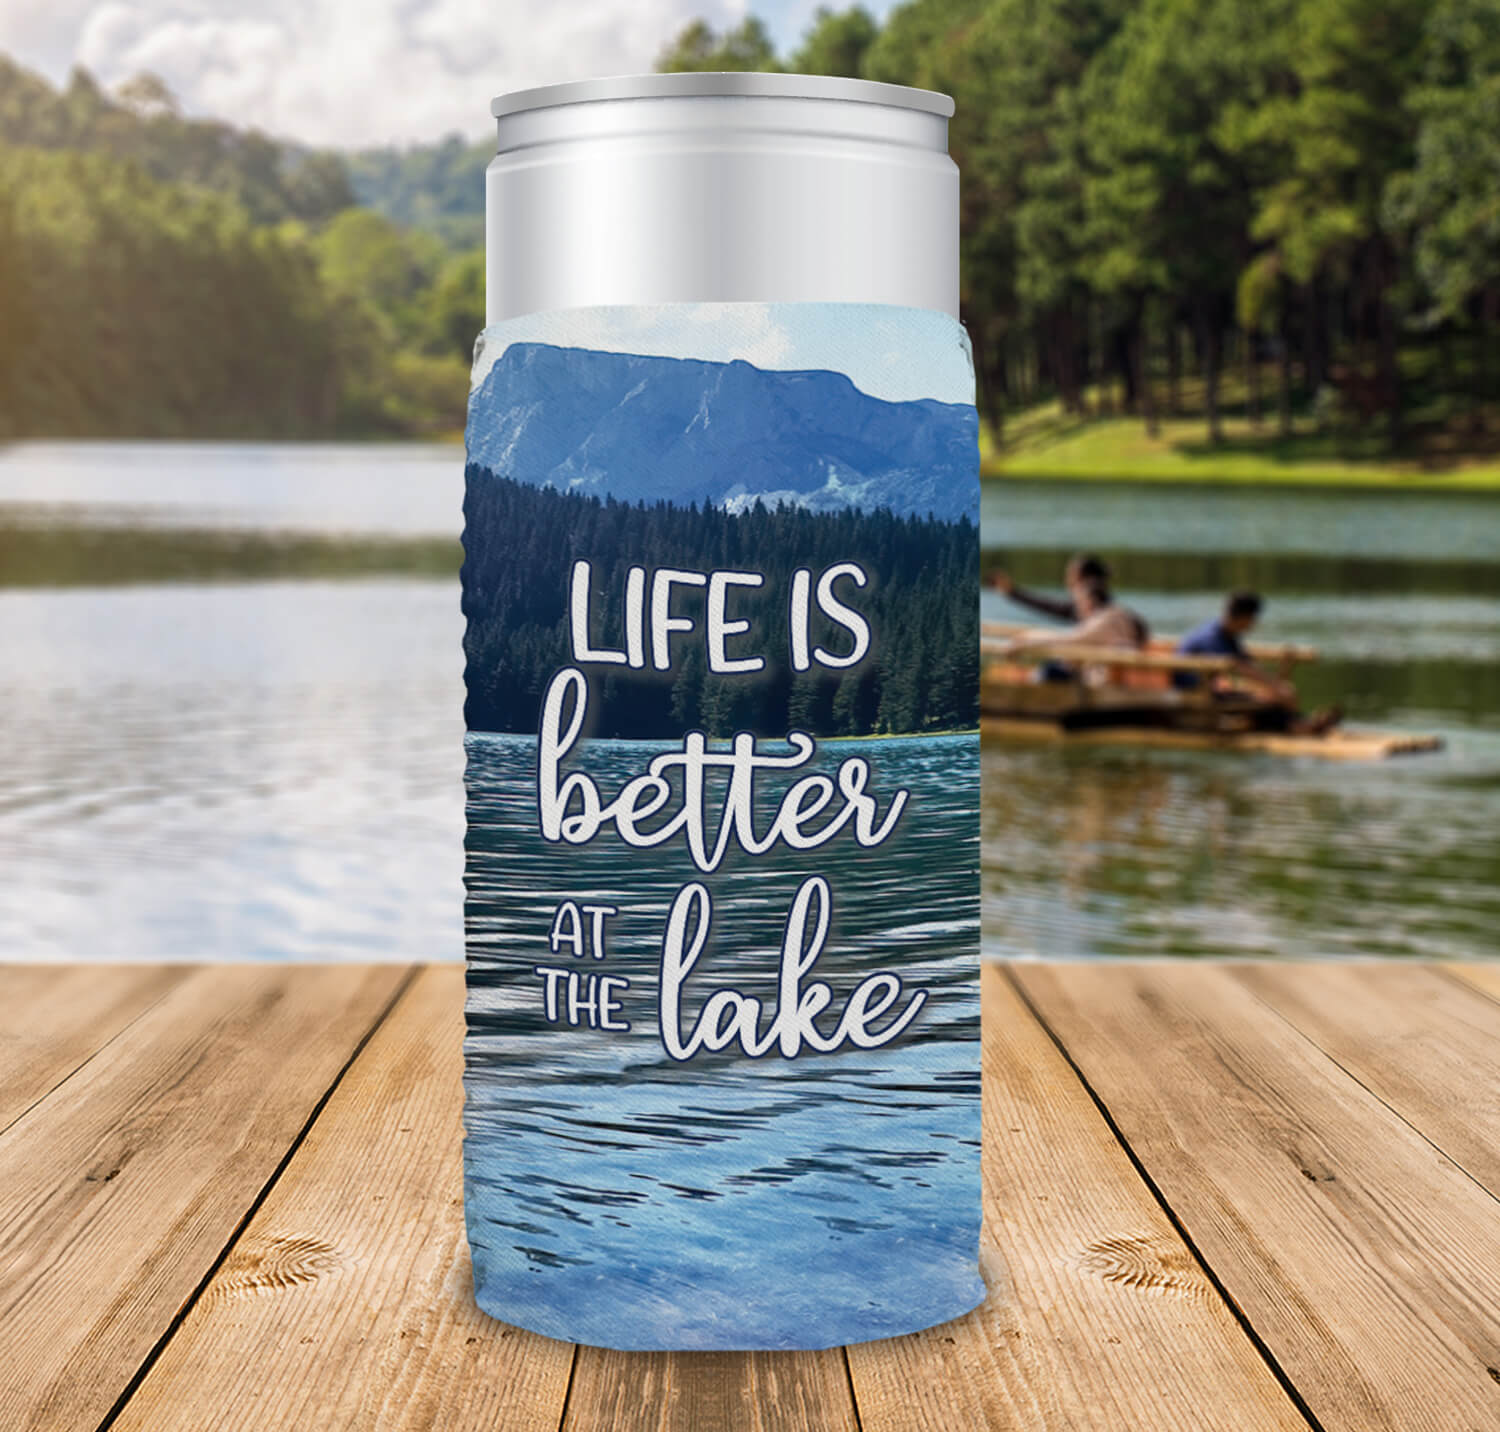 can insulator customized with 'life is better at the lake' and an image of a peaceful lake